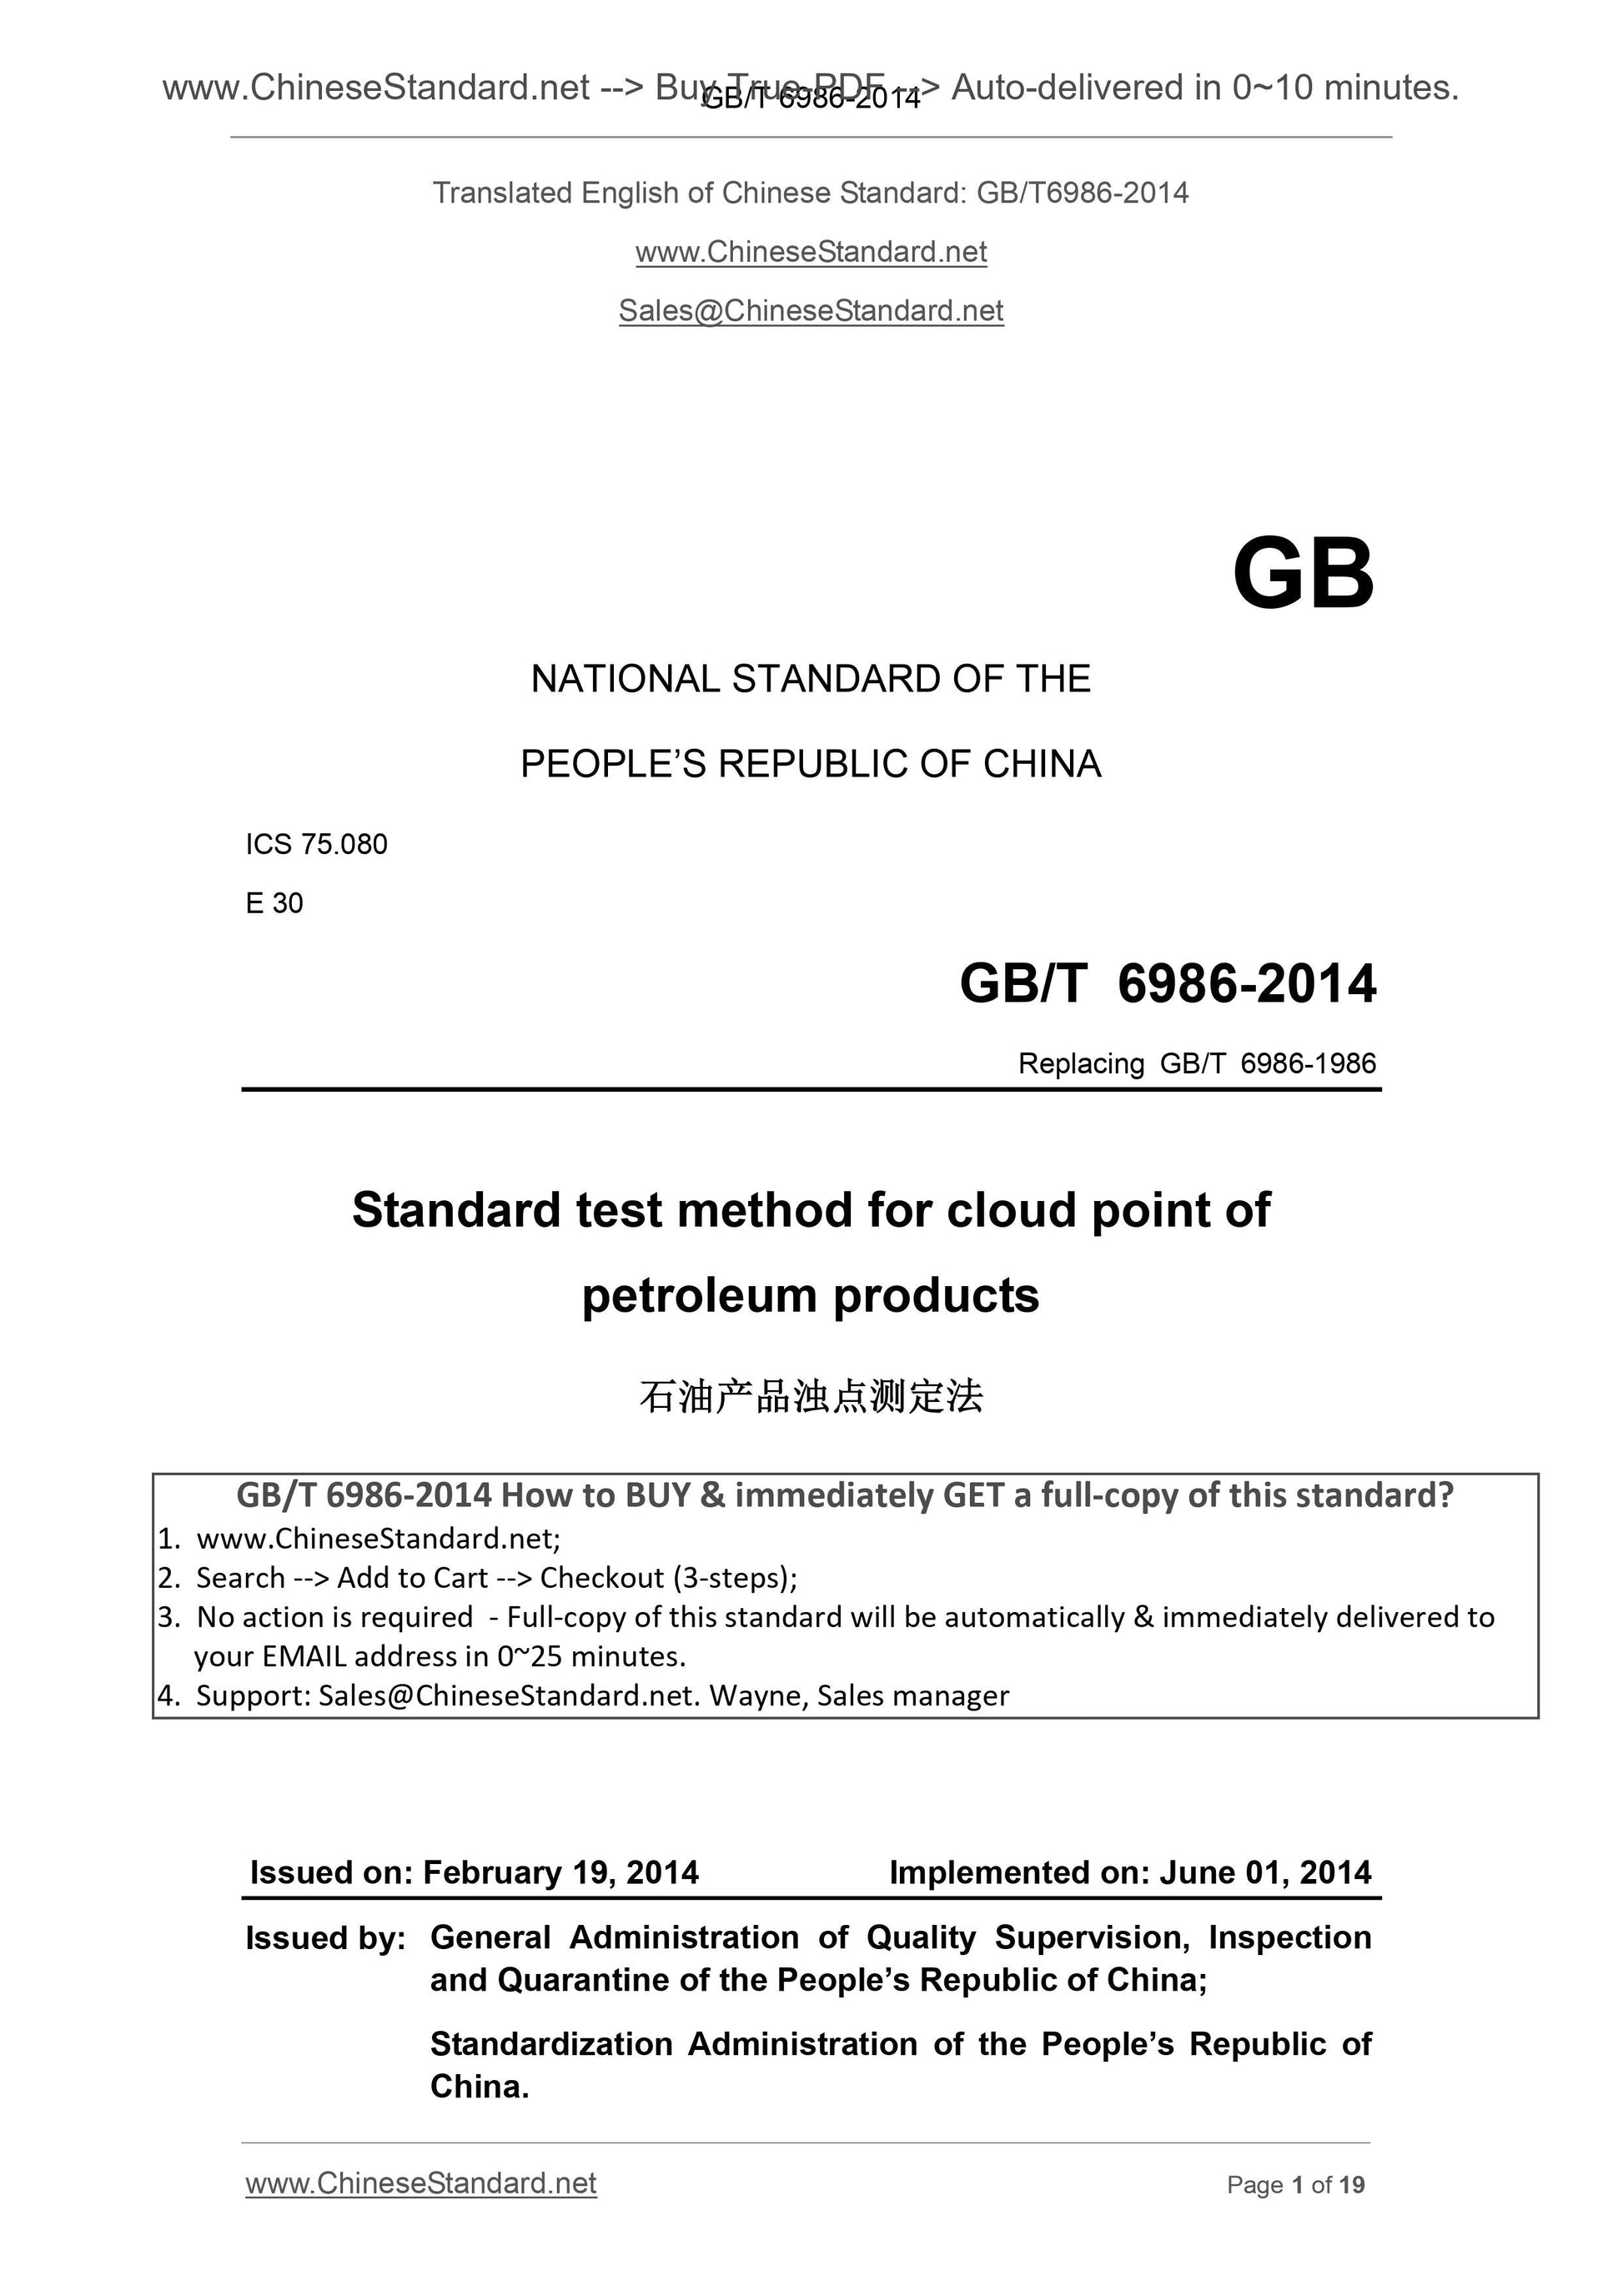 GB/T 6986-2014 Page 1